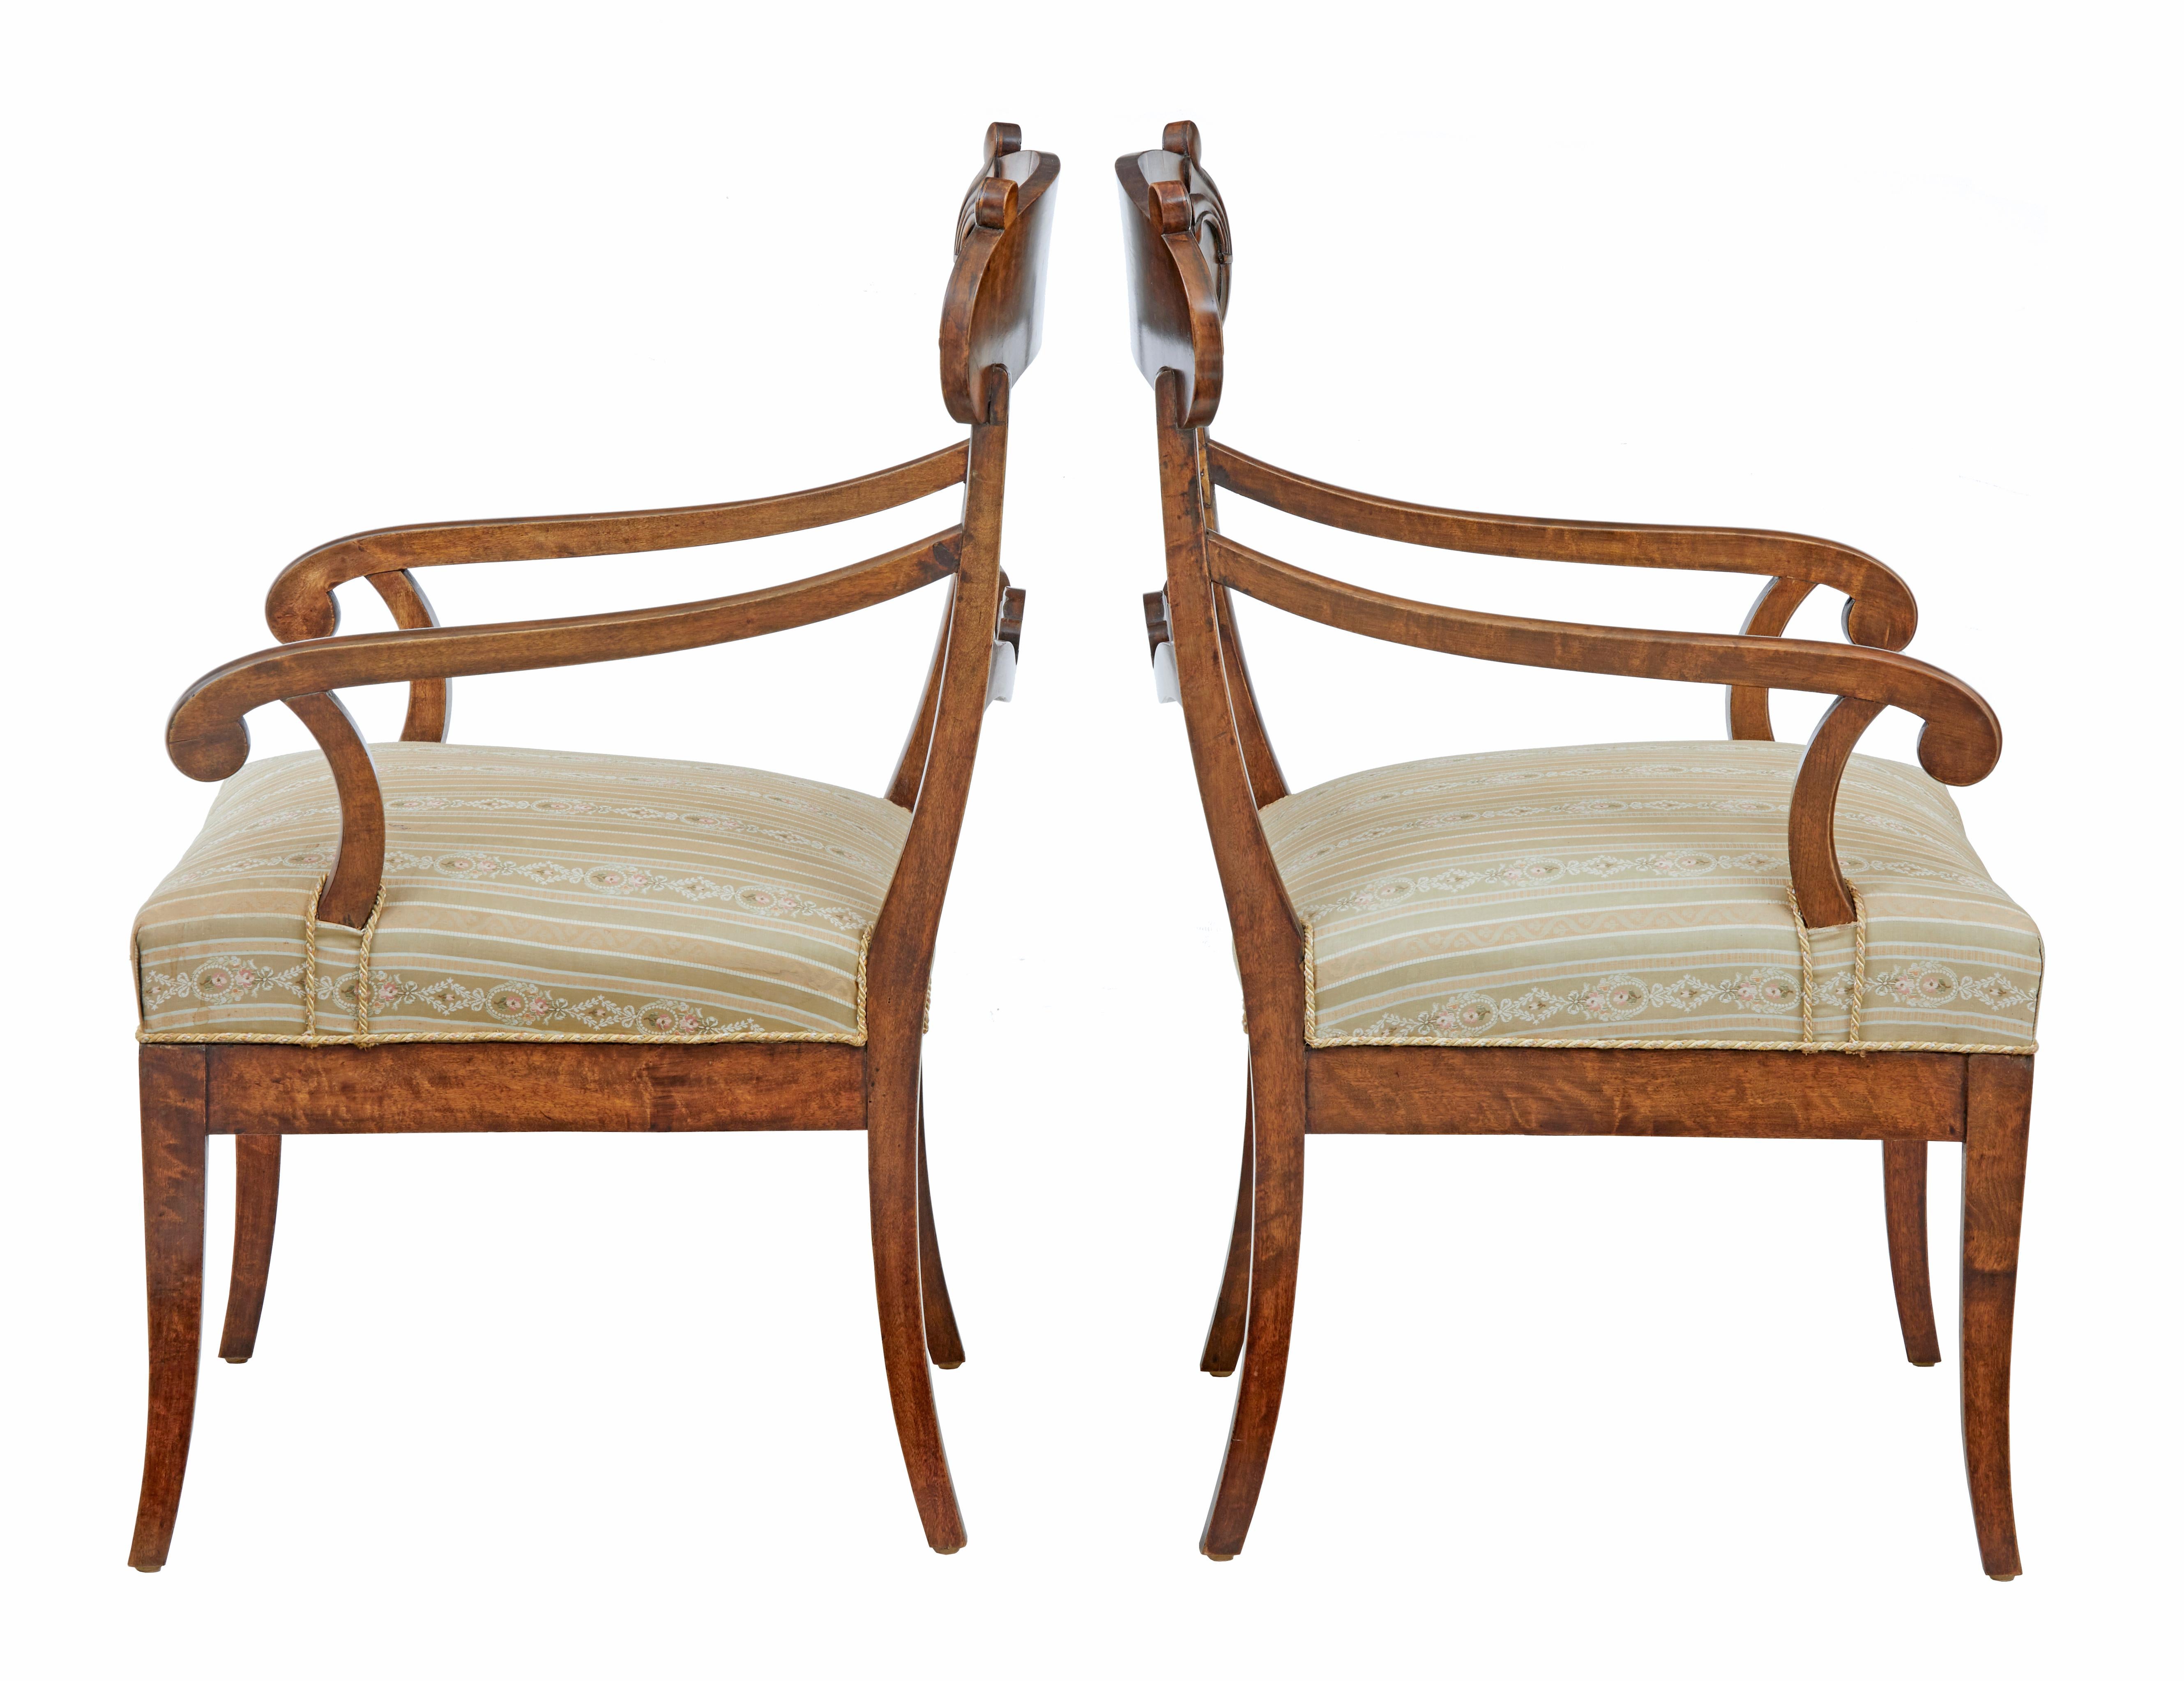 Elegant pair of Swedish dark birch armchairs, circa 1880.

Shaped backs with carved scroll back rest. Scrolled arms lead down to the over stuffed seats. Standing on tapering legs.

Dark stained birch, seats covered in complementary fabric with